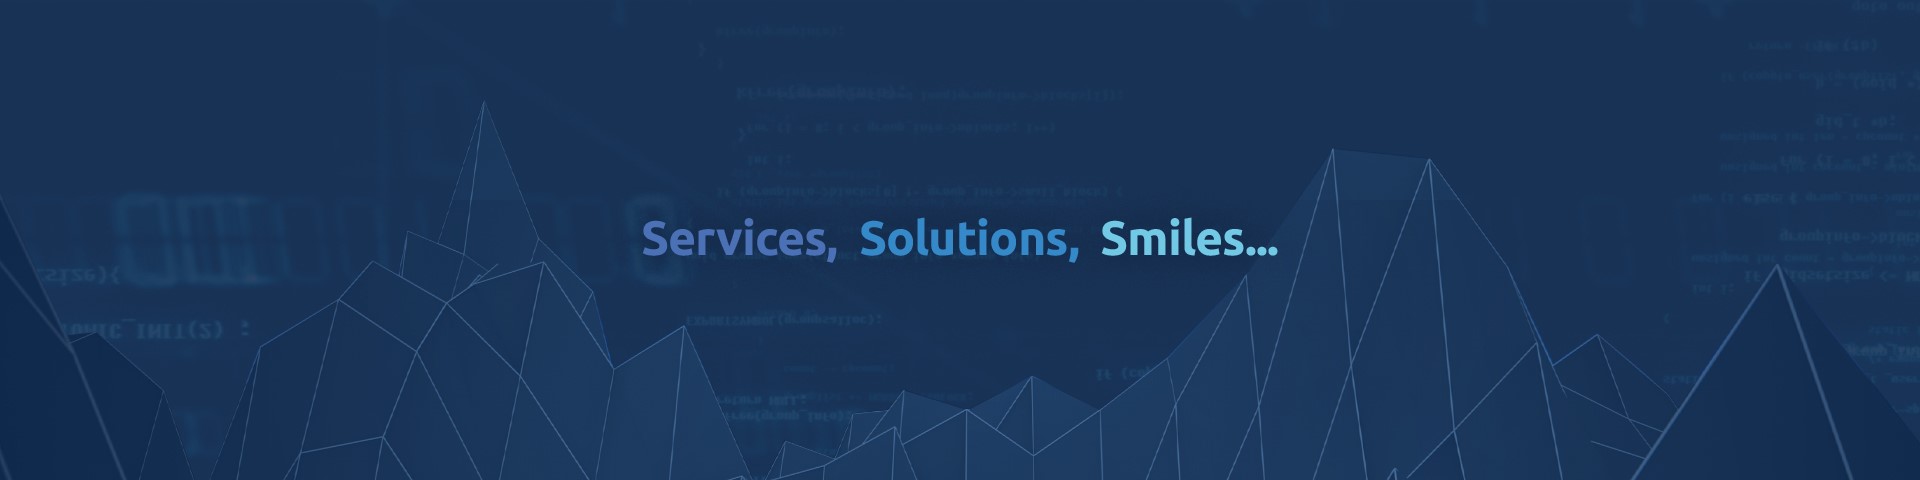 Services, Solutions, Smiles...